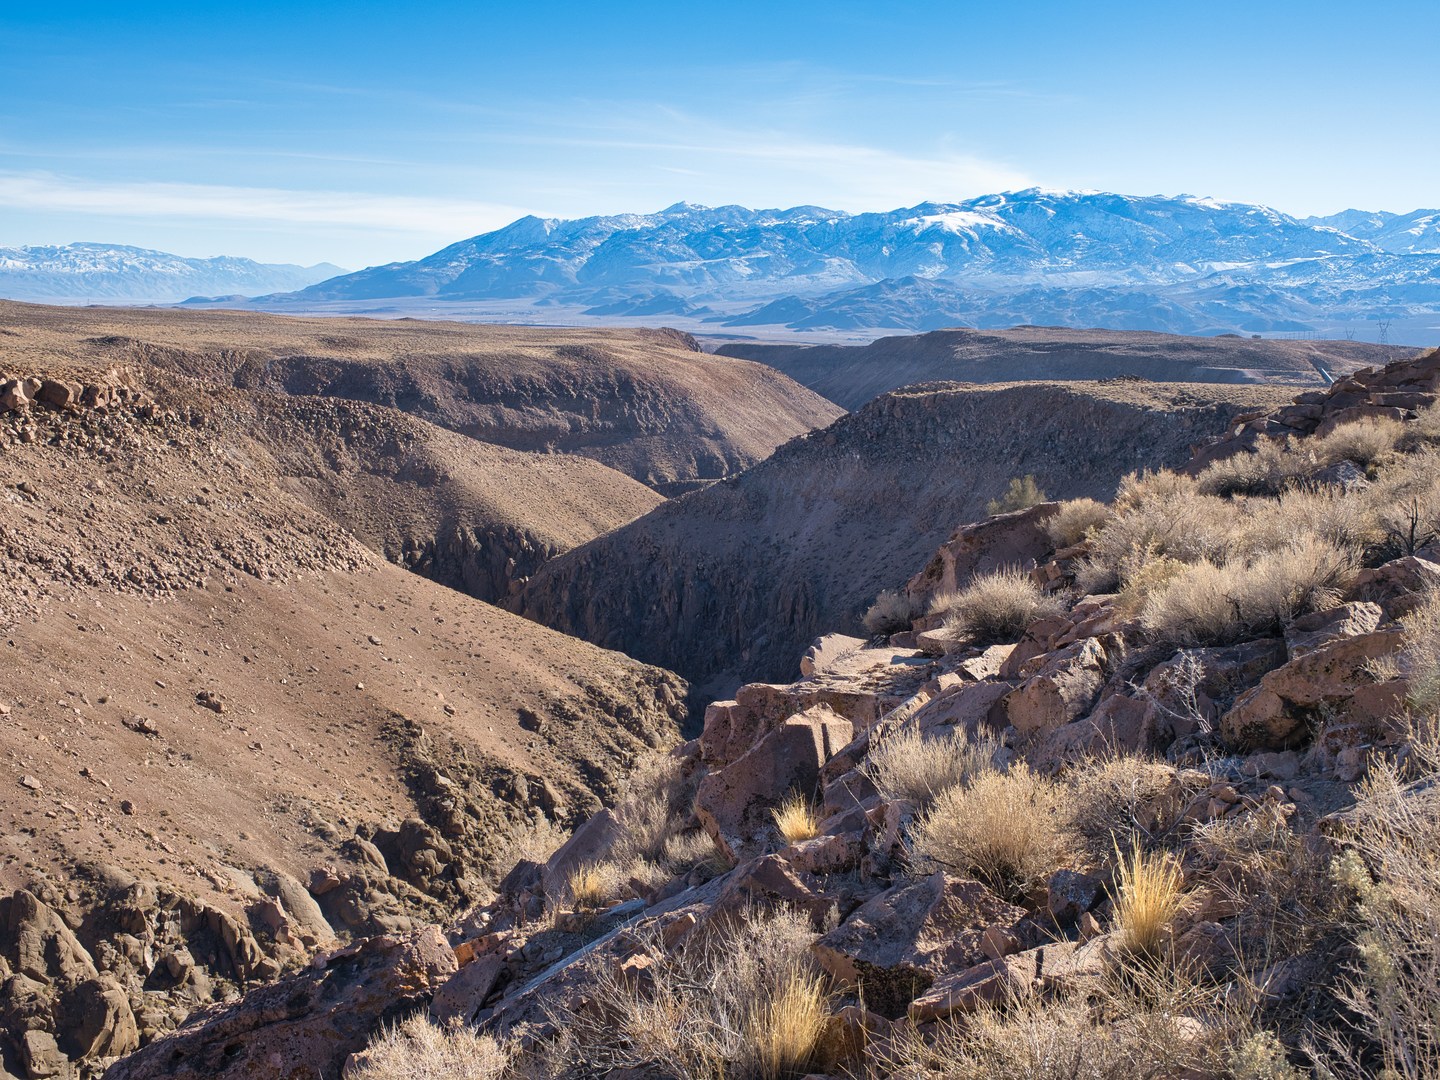 Owens River Gorge Outdoor Project